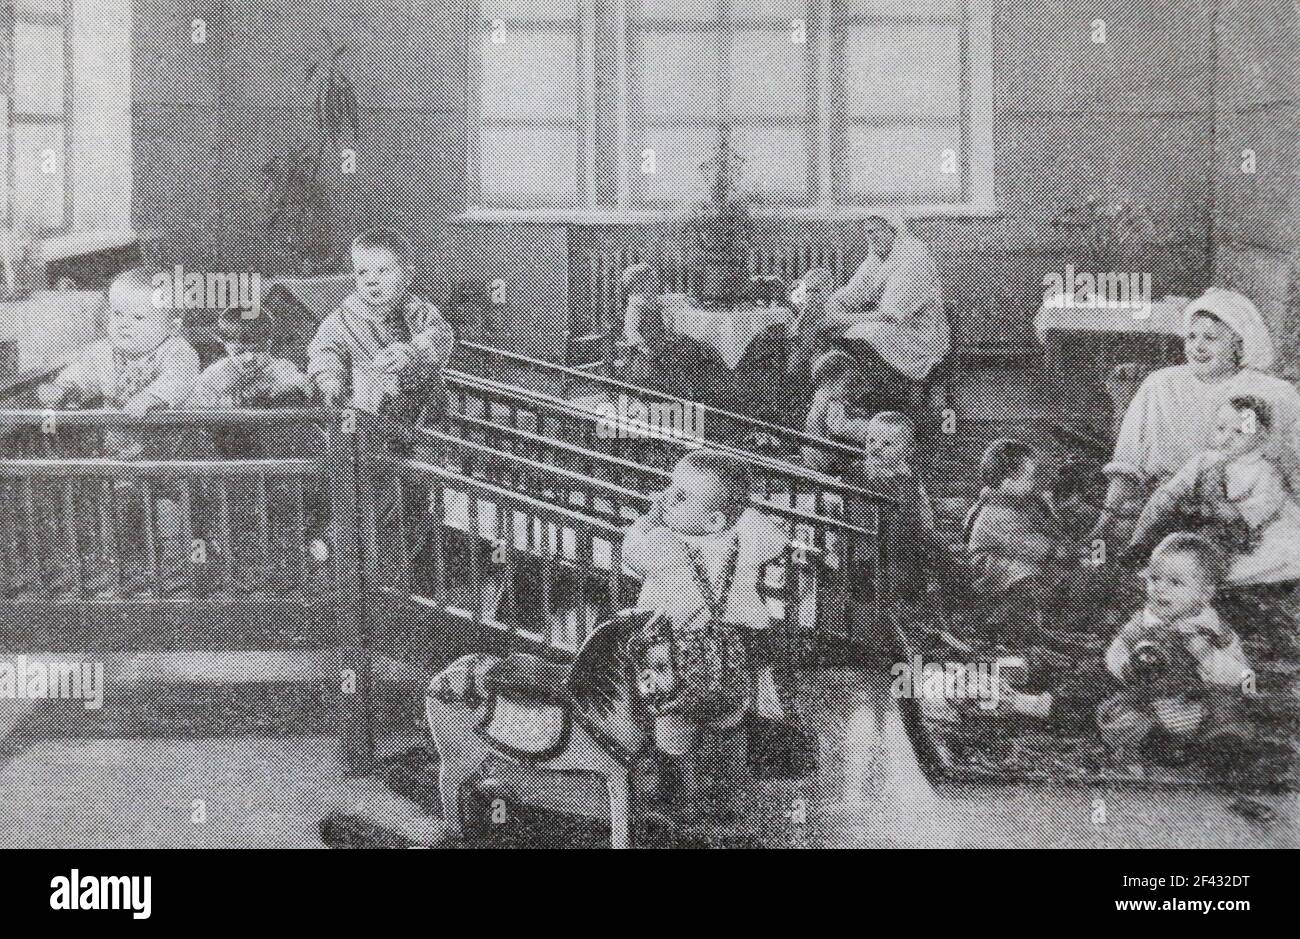 Nursery at the Vladimir Tractor Plant in the Soviet Union in the 1950s. Stock Photo